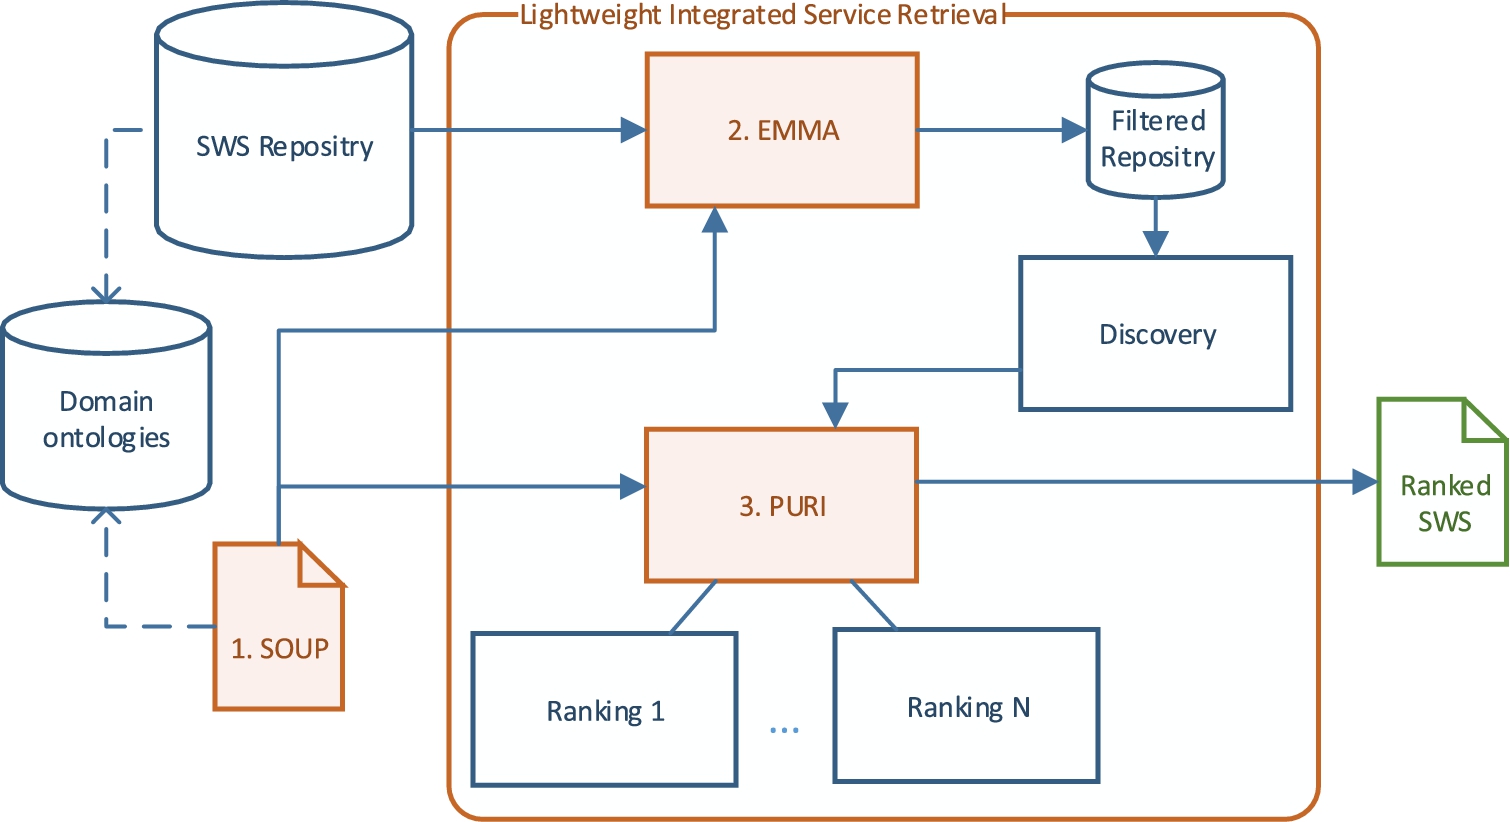 A lightweight, integrated service retrieval architecture. (Colors are visible in the online version of the article; http://dx.doi.org/10.3233/AIC-140644.)